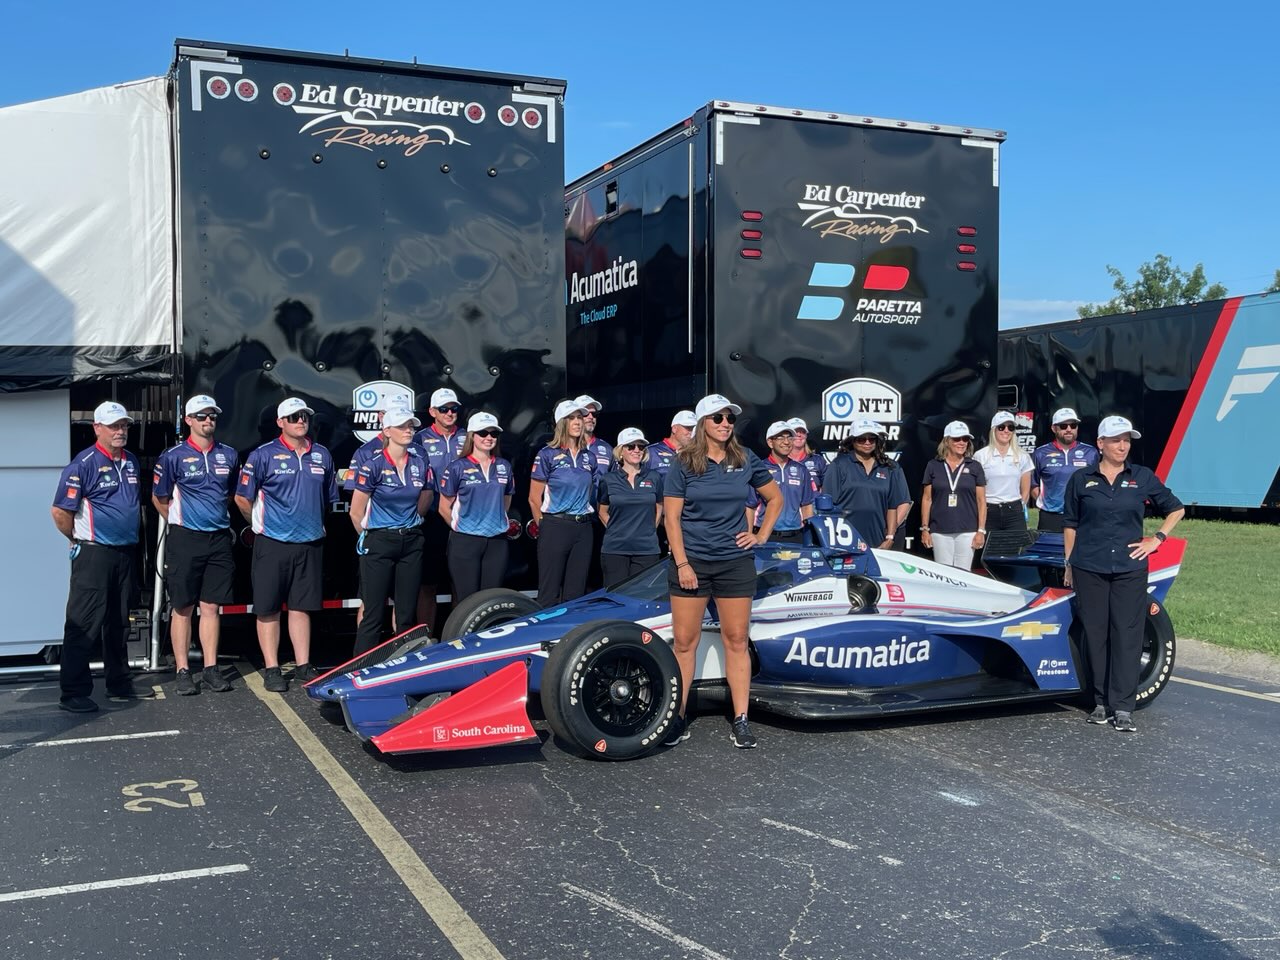 Acumatica and Paretta Autosport: Championing INDYCAR's Only Woman-owned, Woman-driven, and Woman-forward Team